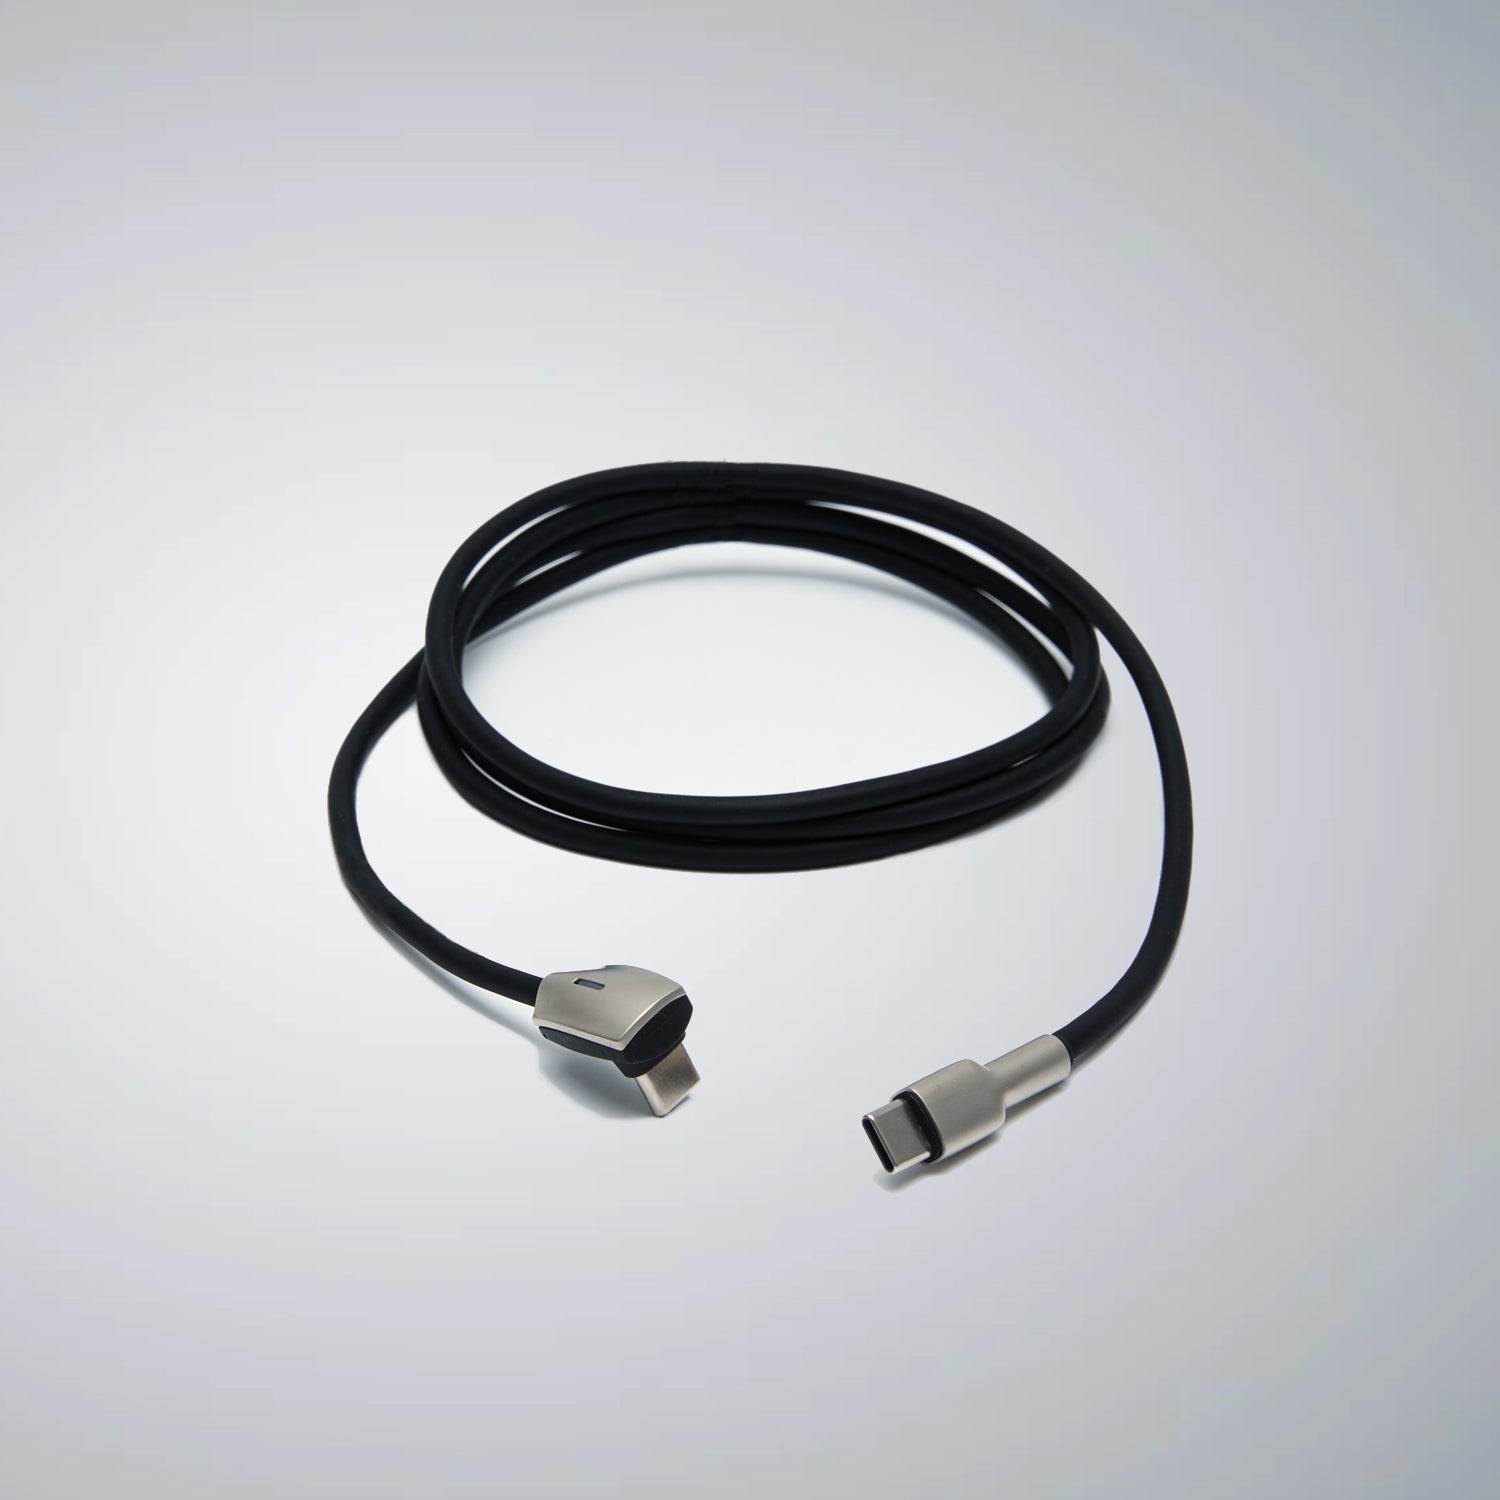 USB Cable with Wall Connector Design 1M